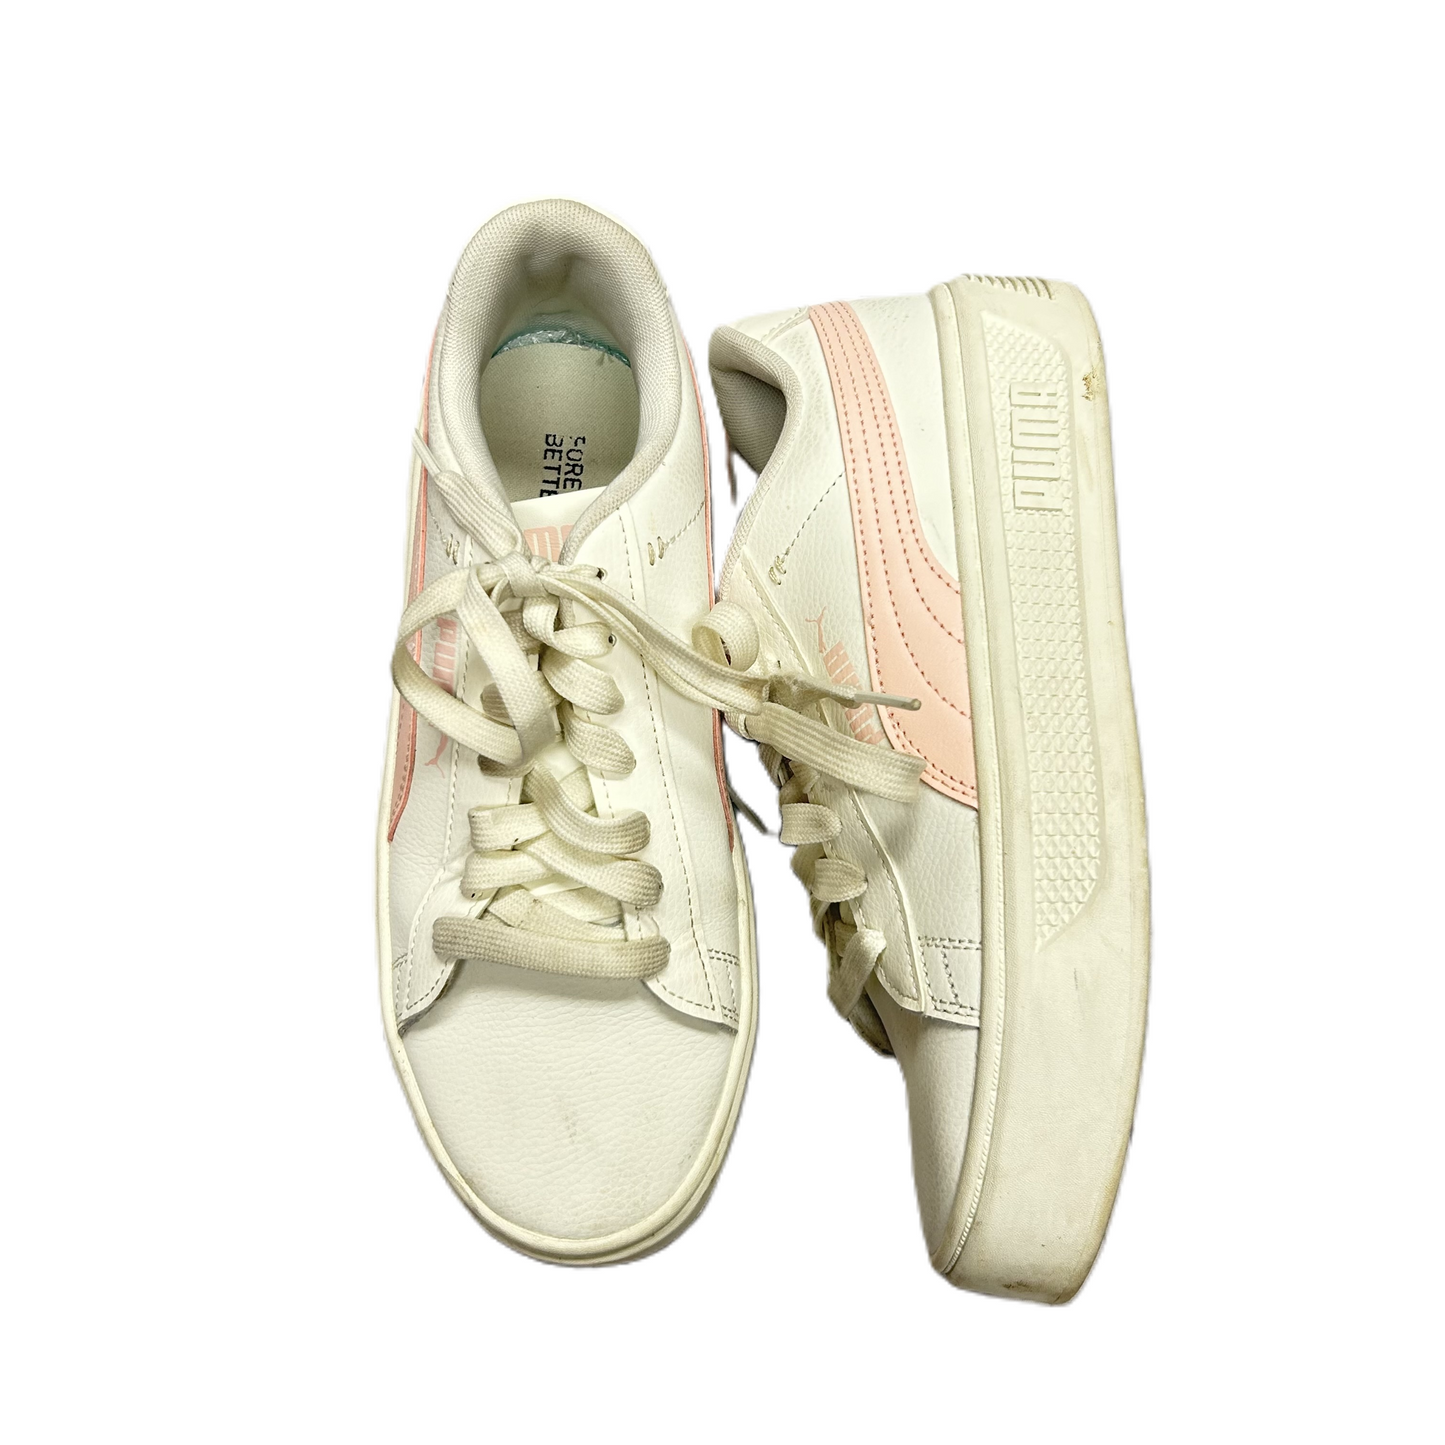 Pink & White Shoes Sneakers Platform By Puma, Size: 8